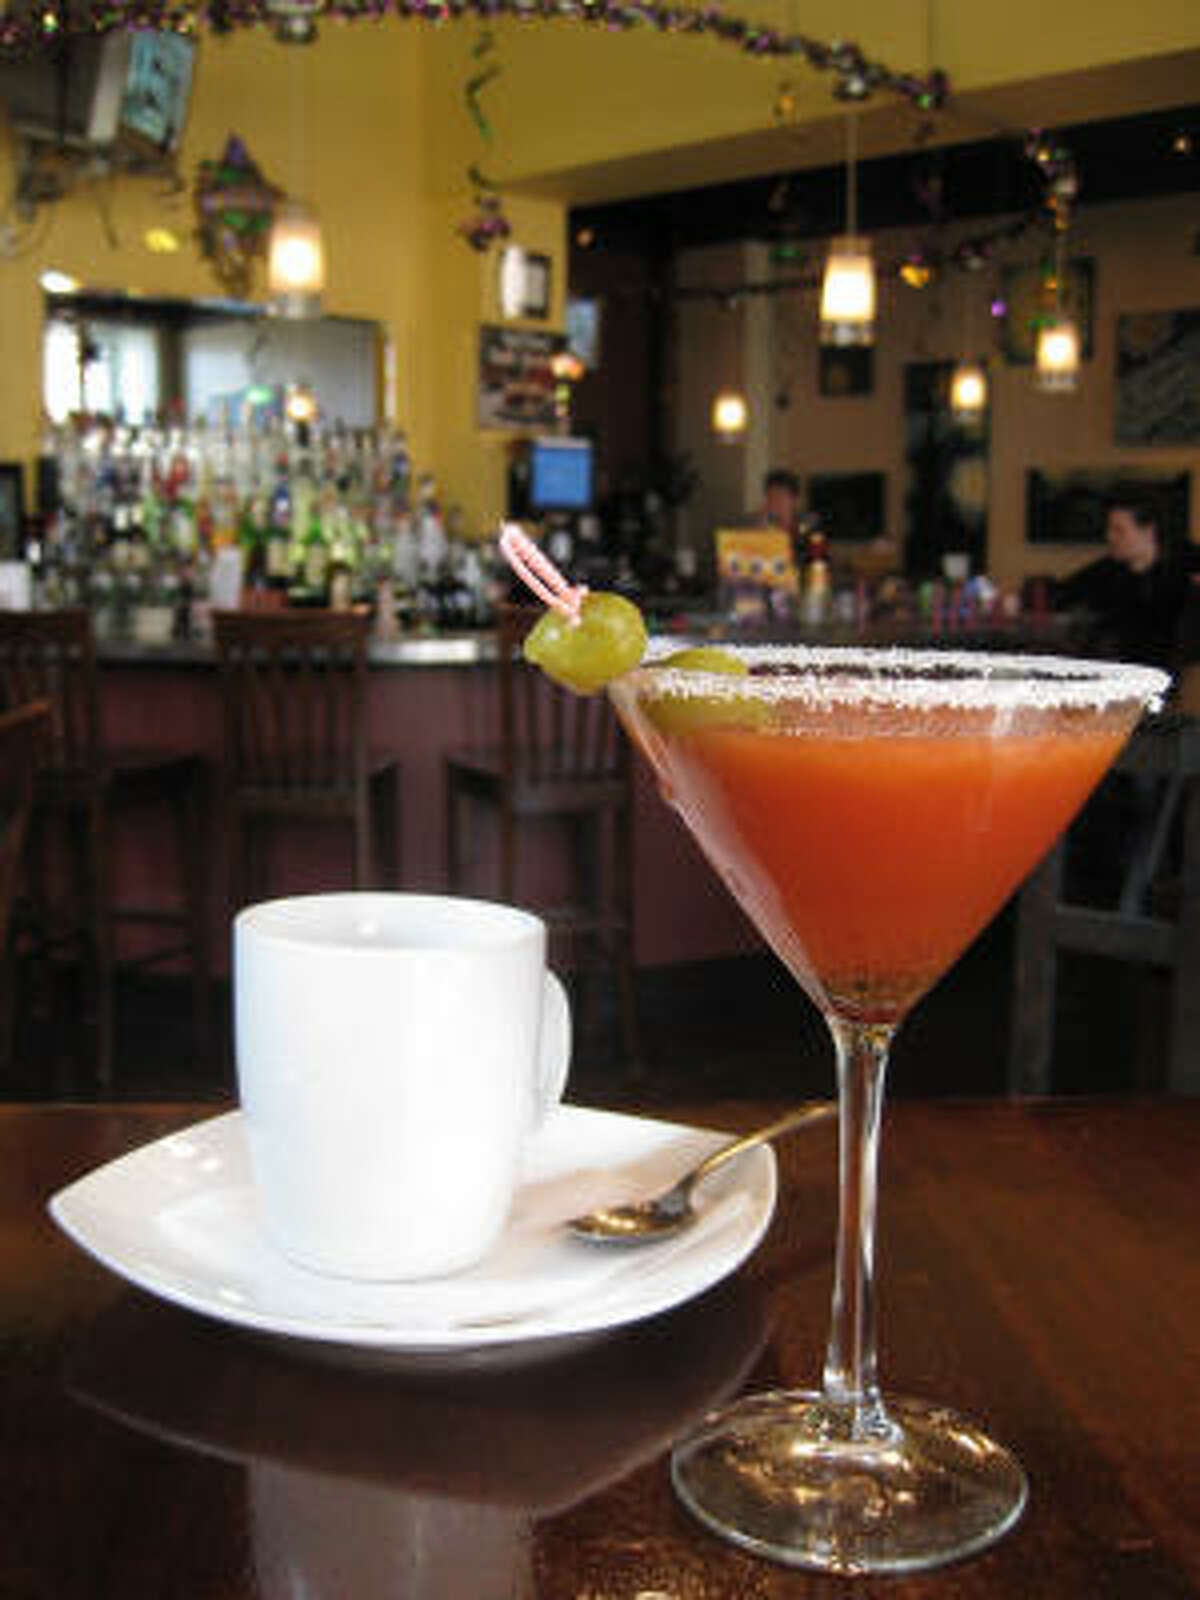 Van Goghz Martini Bar and Bistro in St. Louis offers delicious coffee and Bloody Marys, served in a martini glass.